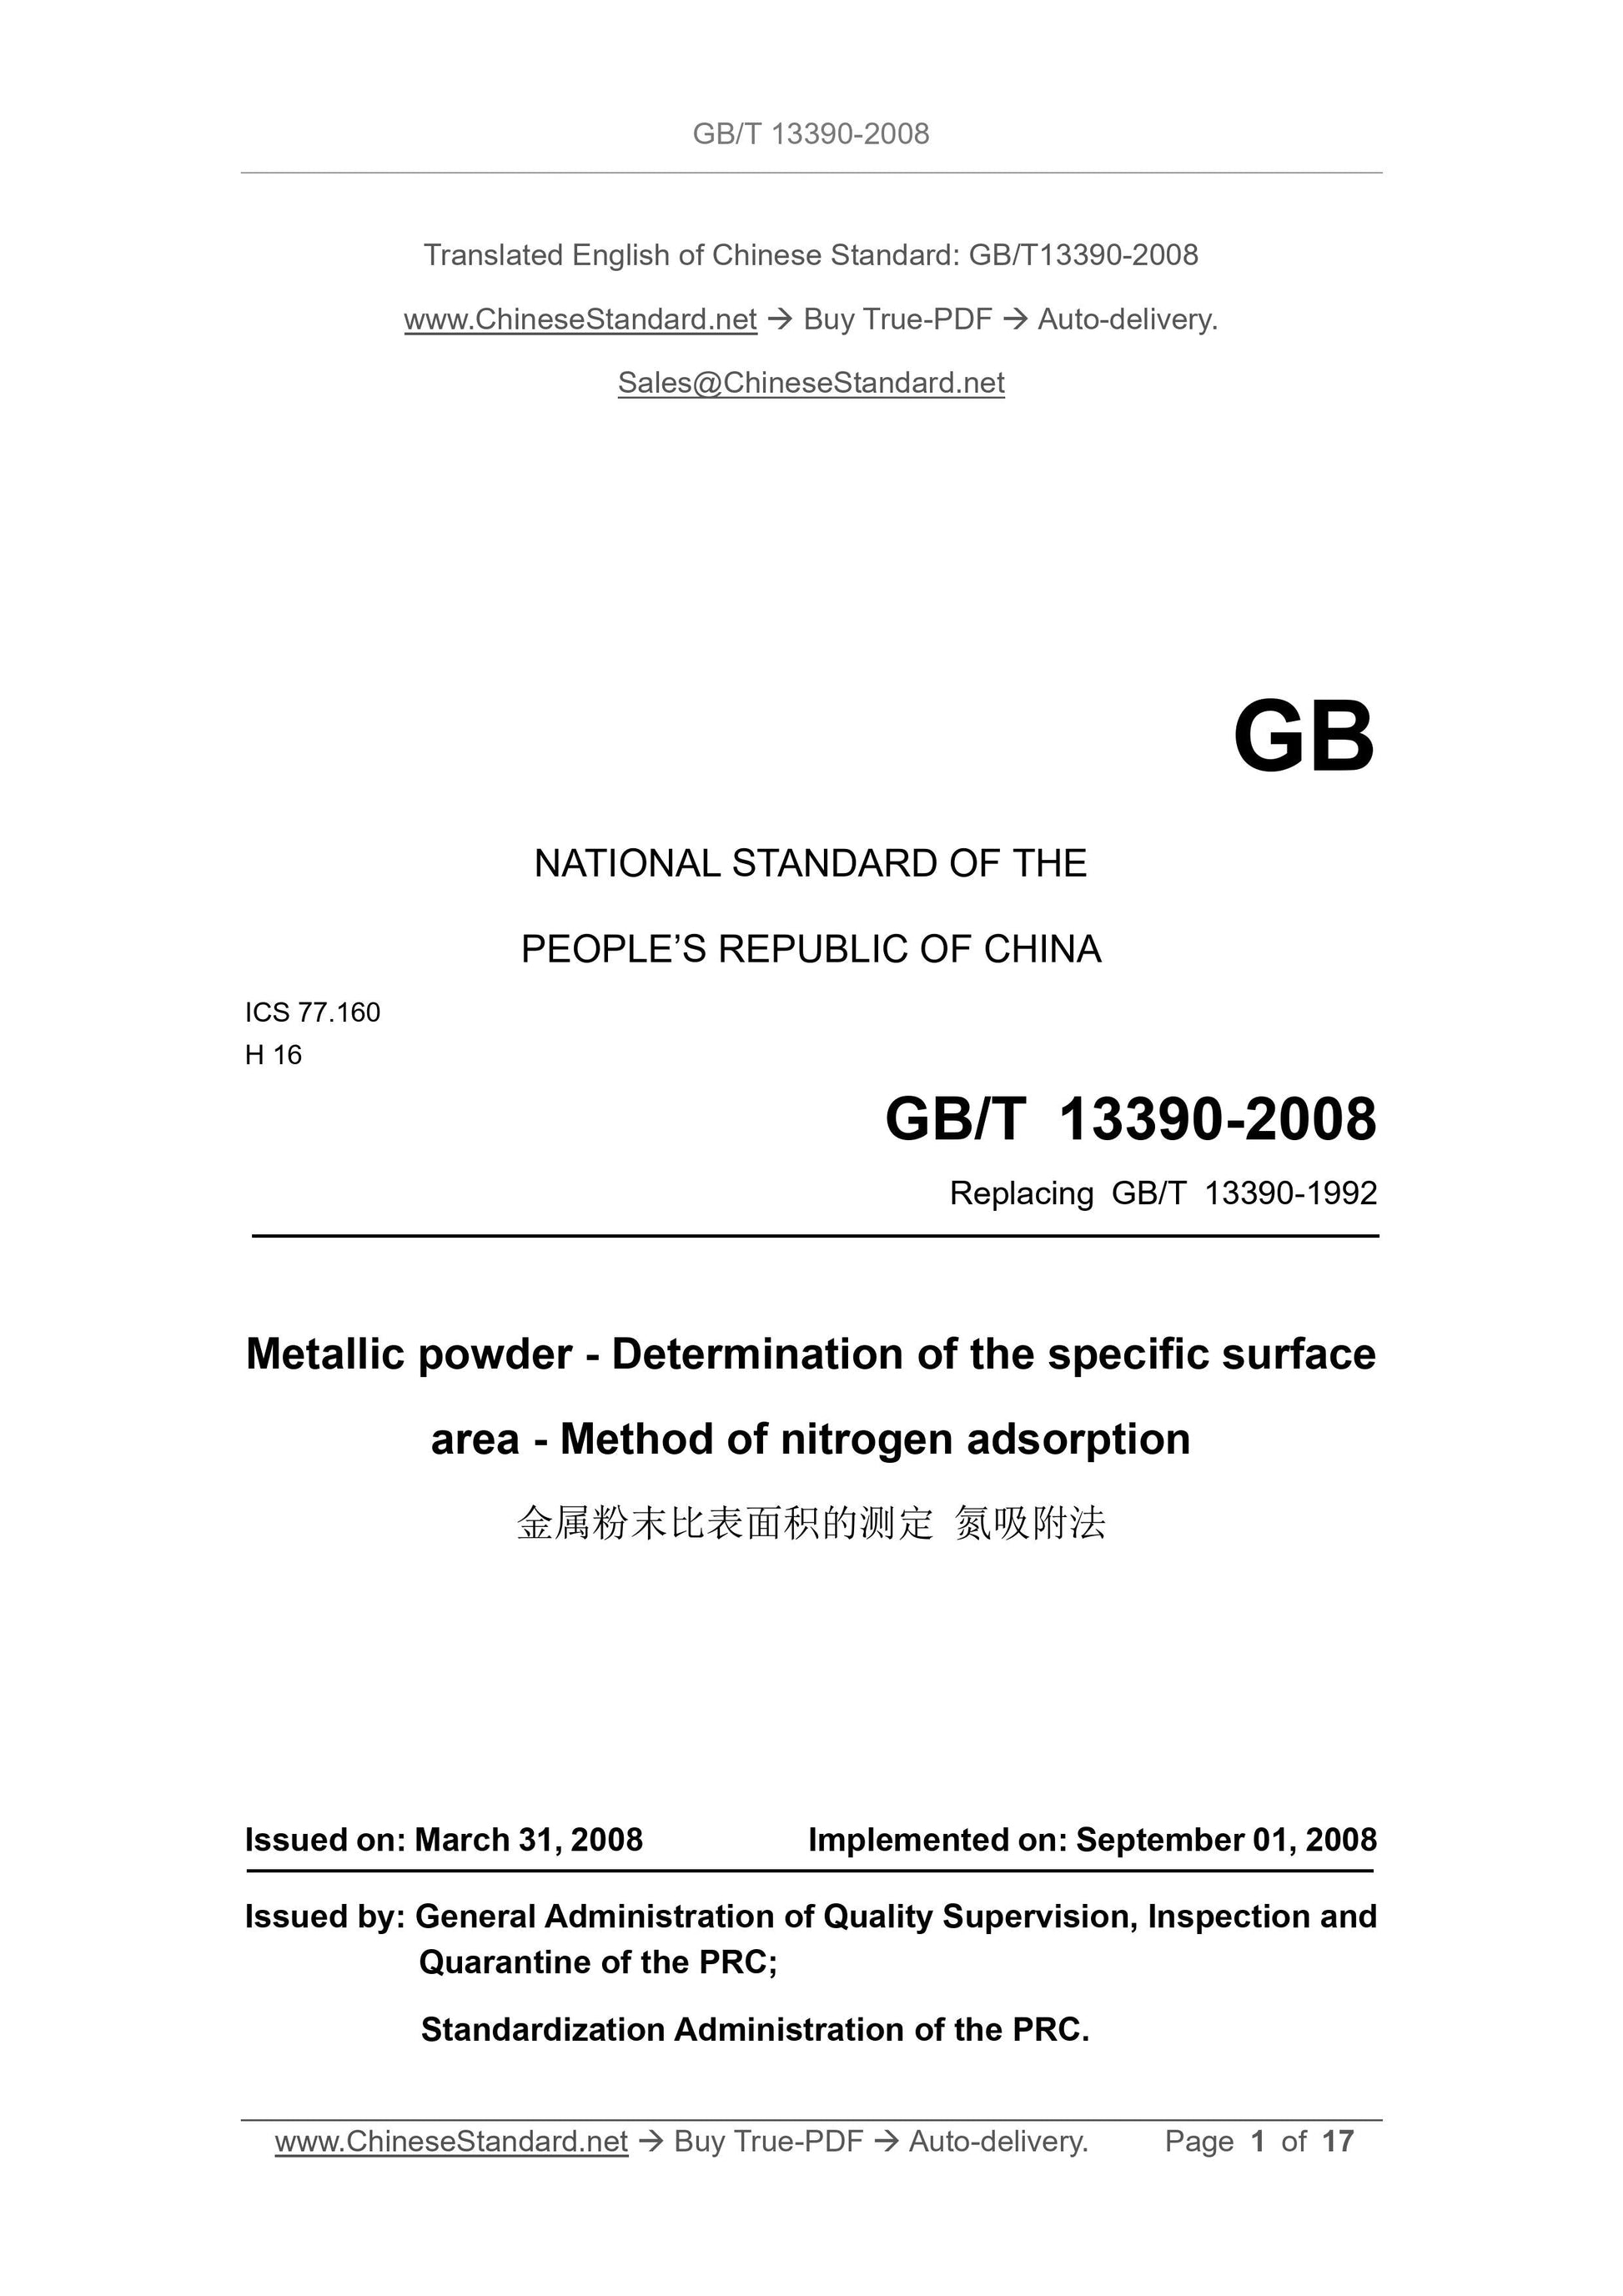 GB/T 13390-2008 Page 1